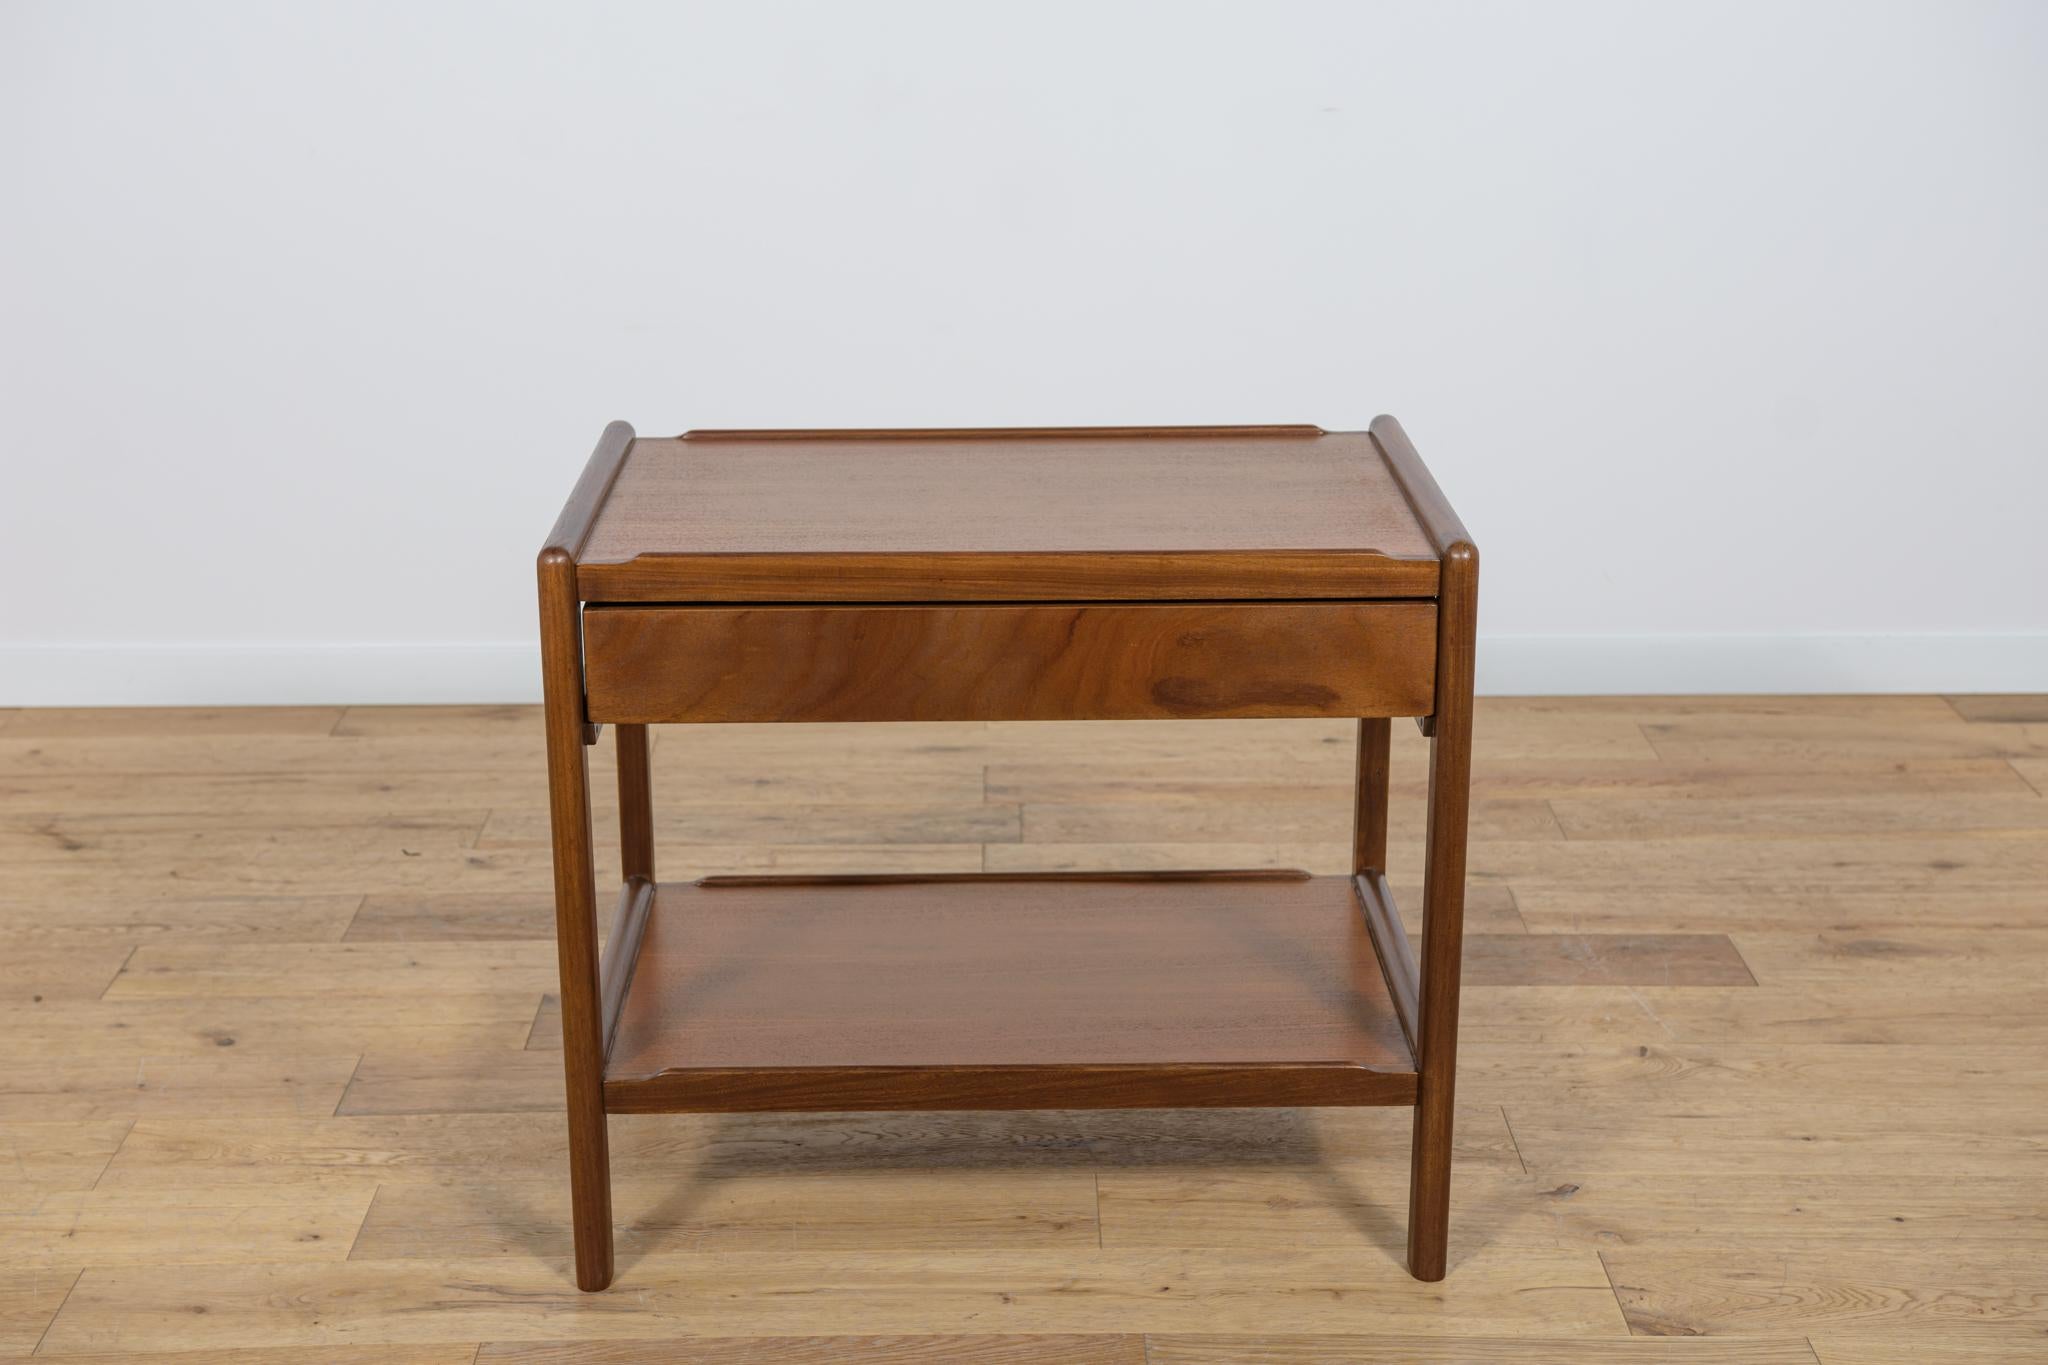 Console made in Denmark in the 1970s. Made of teak wood, with a shelf in the lower part and a drawer in the upper part. It has been thoroughly renovated, the wood has been cleaned of the old coating, painted with oak stain, and finished with a